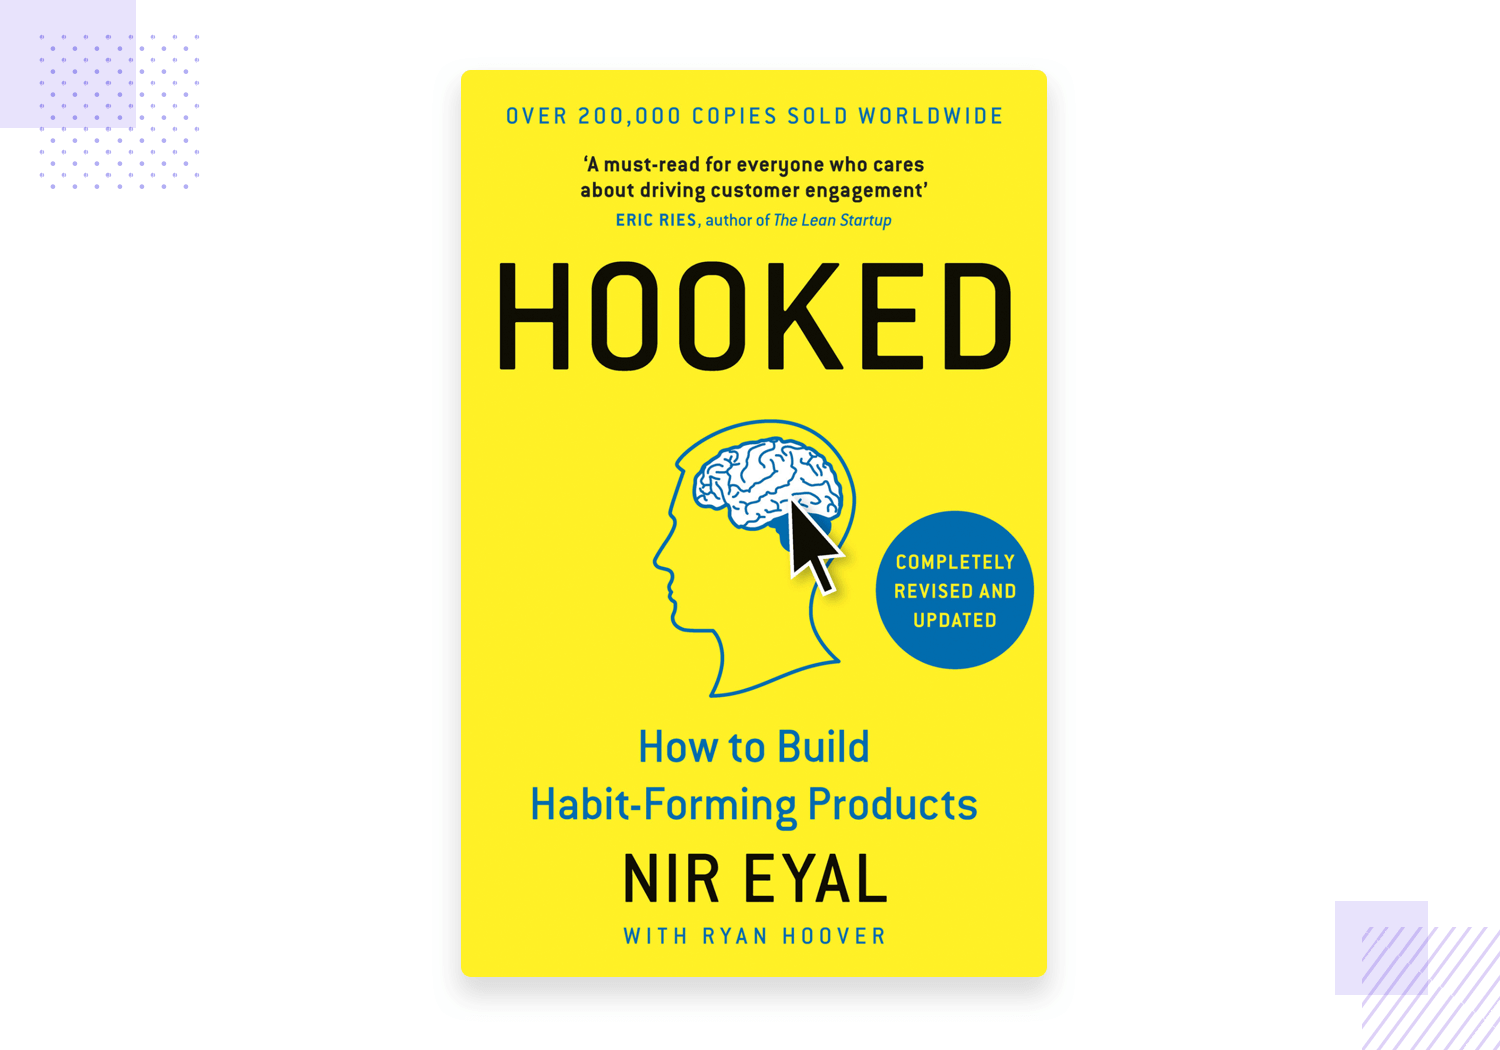 hooked as design book for habit forming products